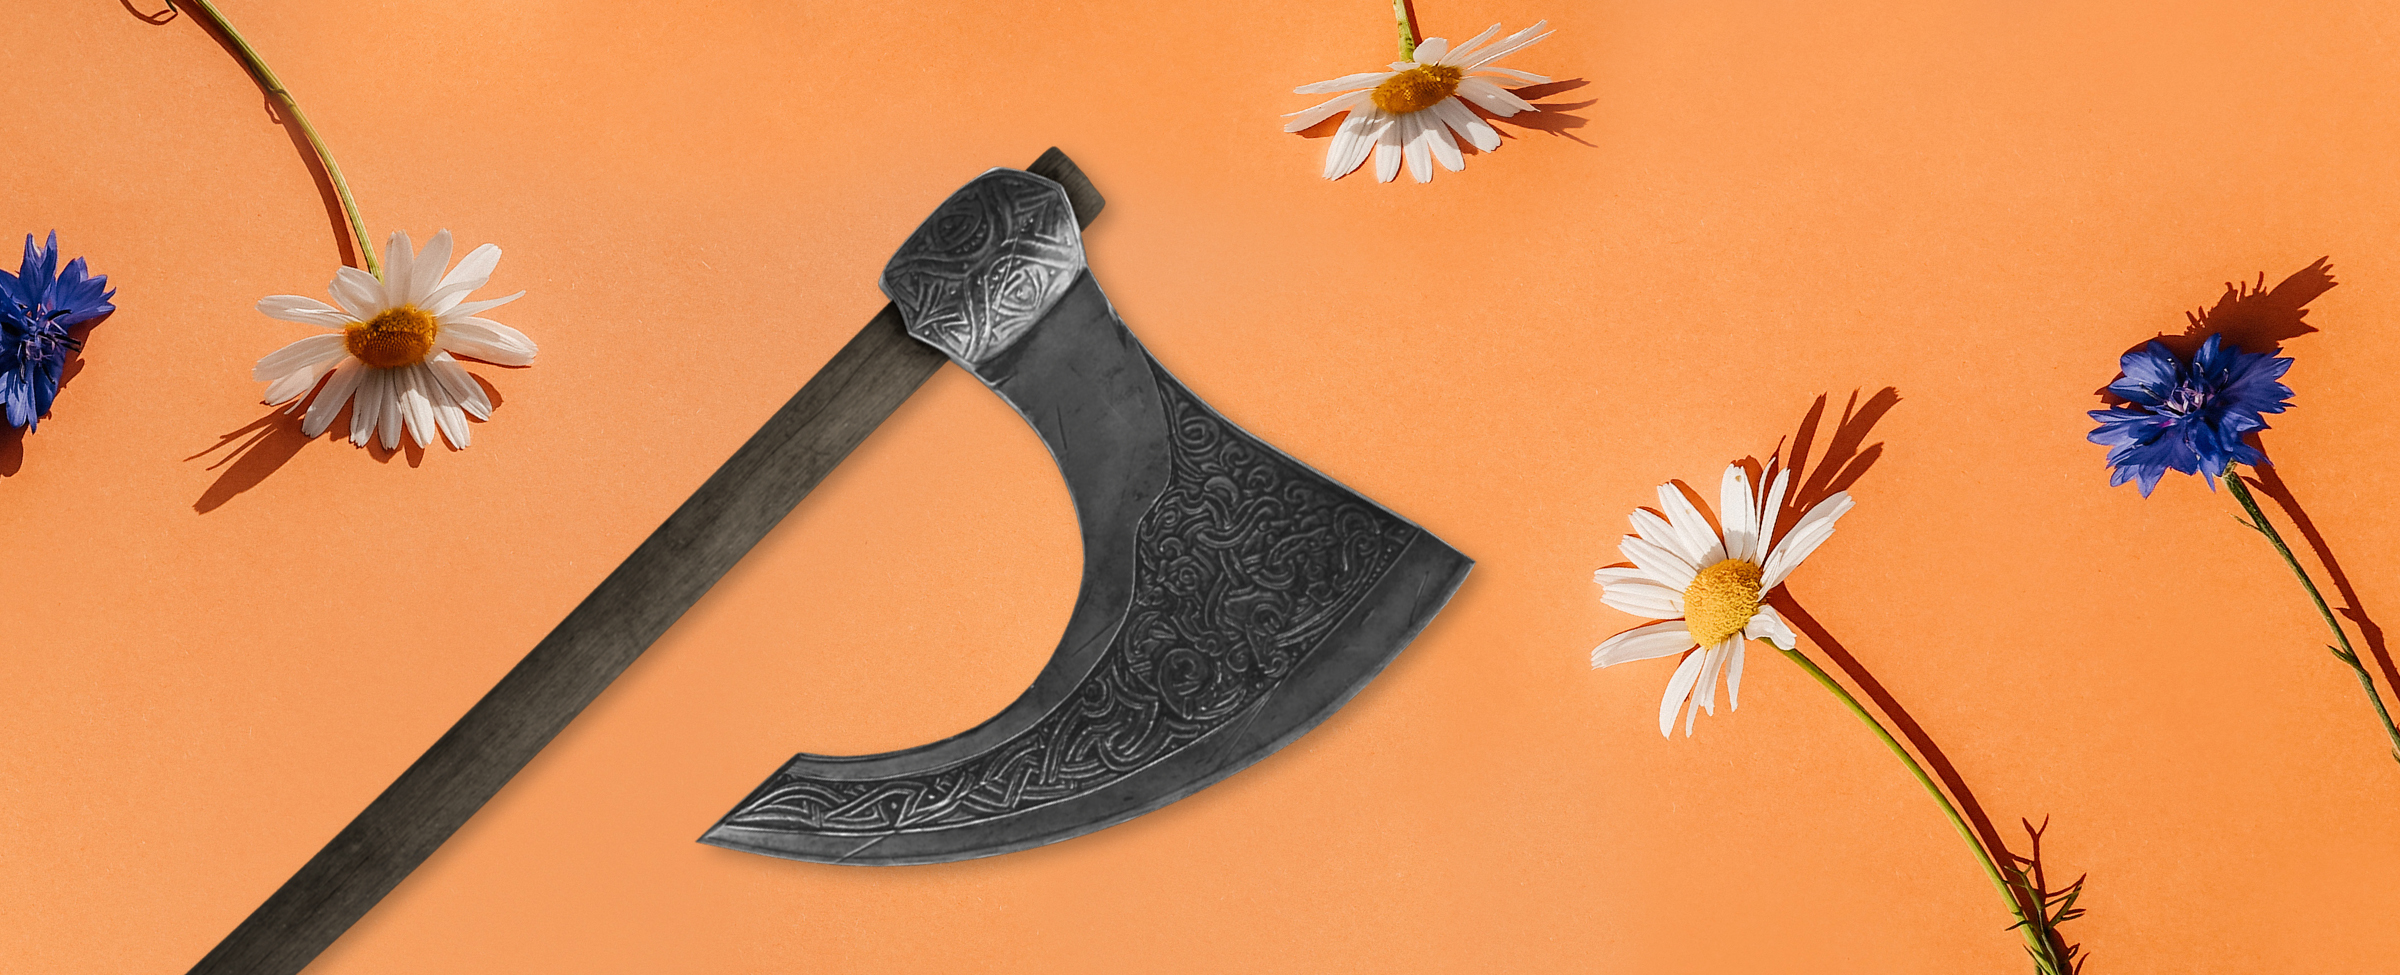 A Viking ax with a patterned blade and a worn wooden handle rests on an apricot-colored table surface, surrounded by blue and white flowers.